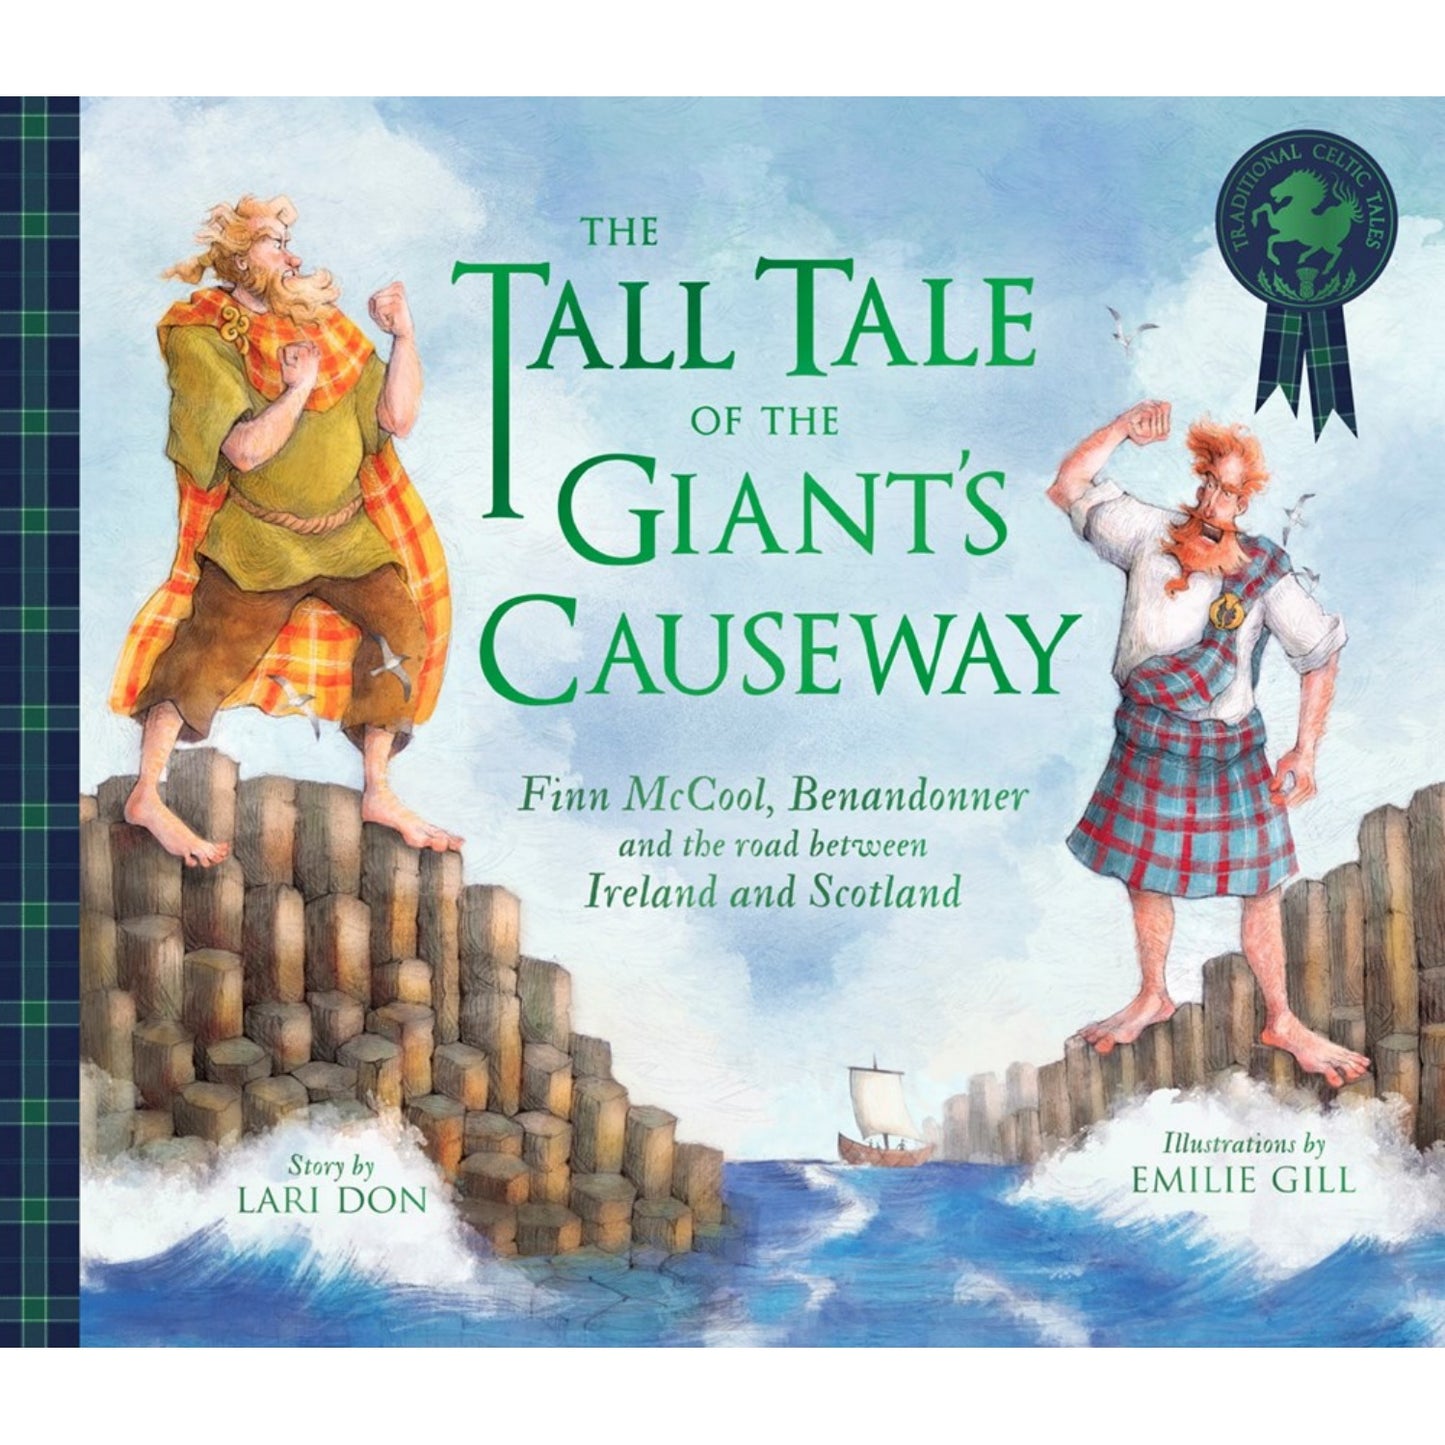 The Tall Tale of the Giant's Causeway | Paperback | Kids’ Books on Myths, Tales & Legends